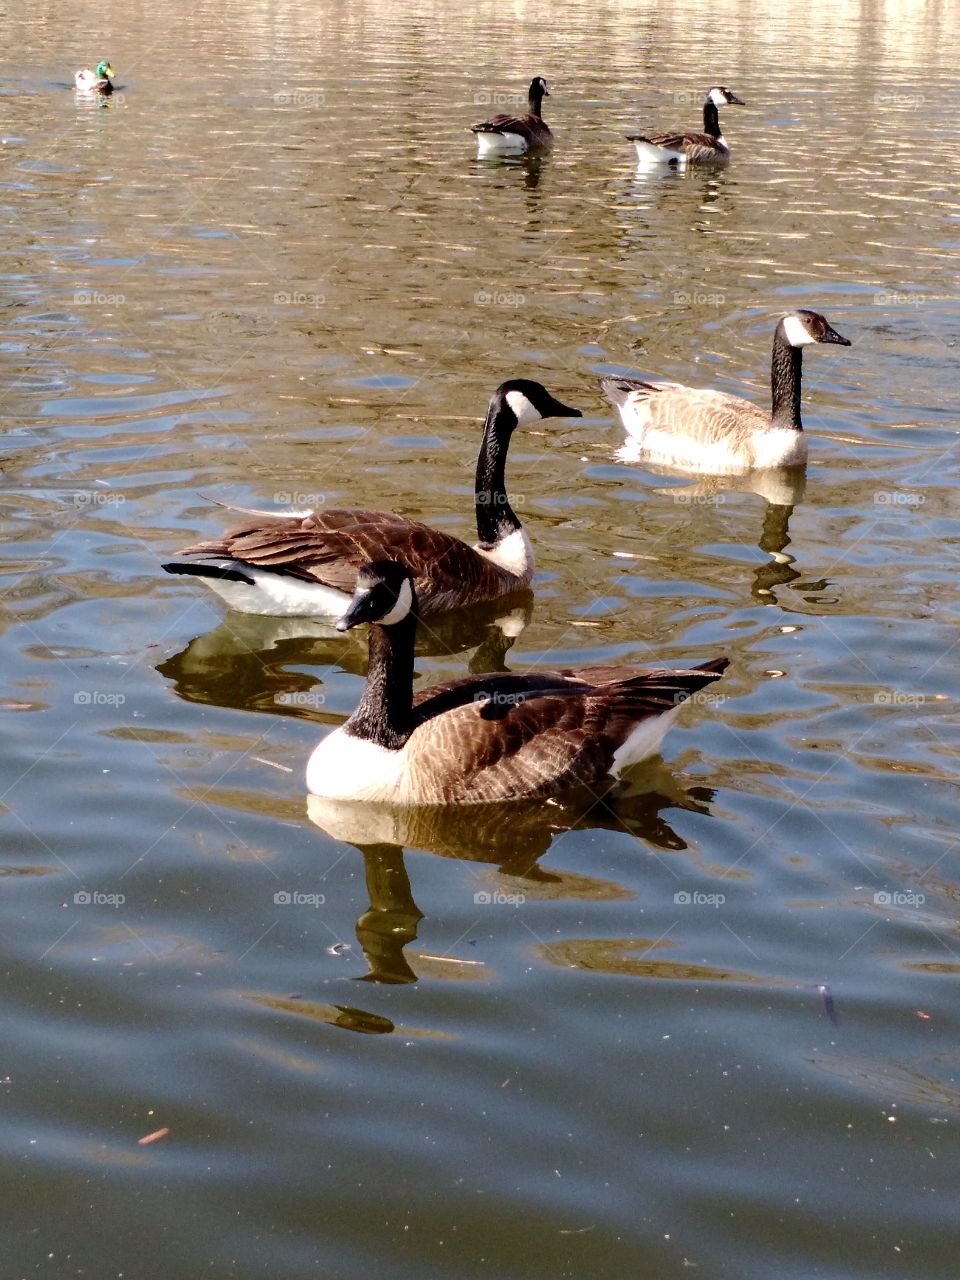 geese together. curious birds